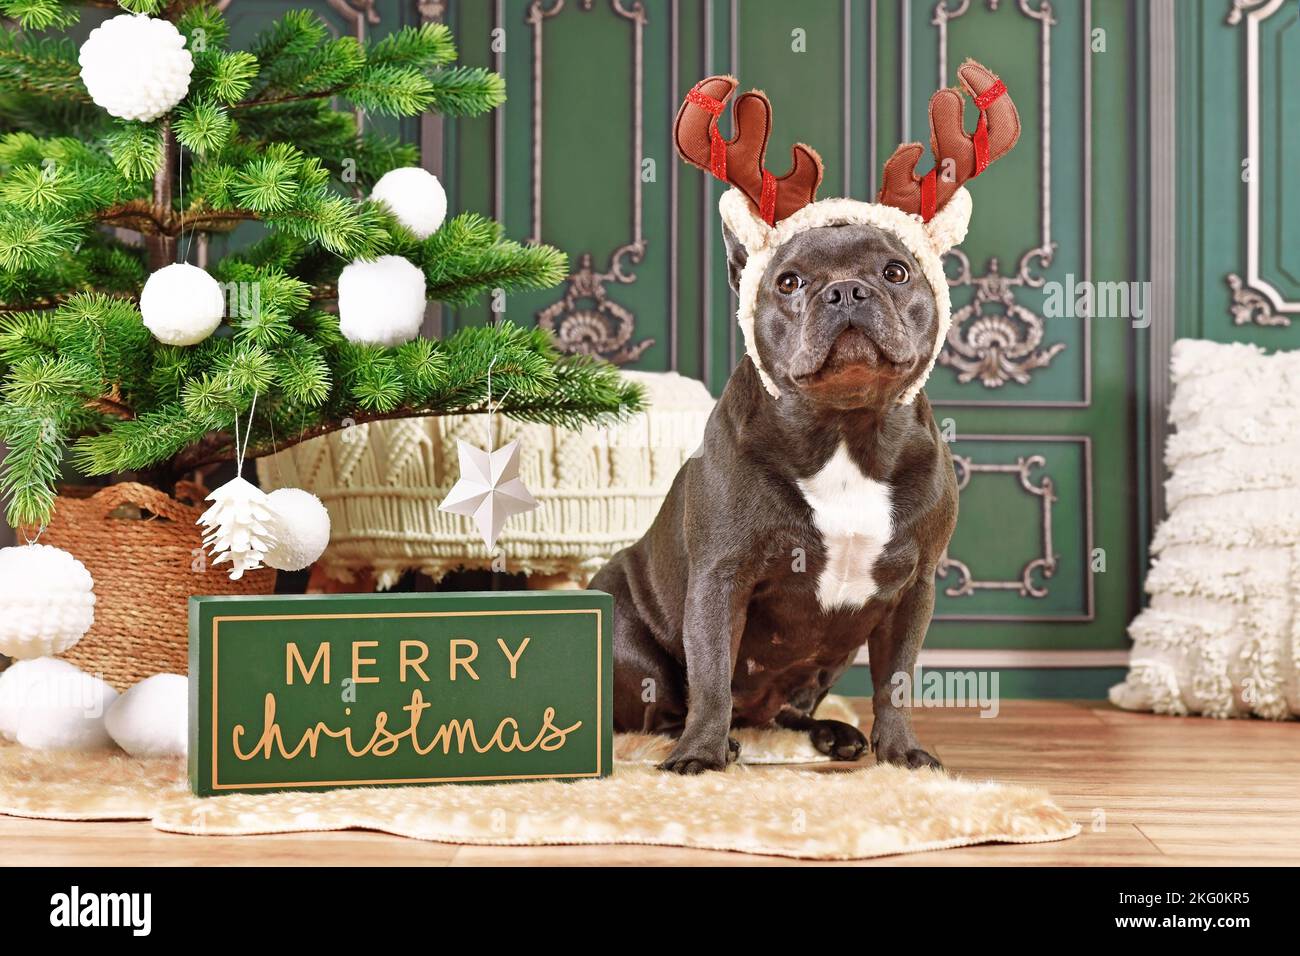 French Bulldog dog with reindeer costume antlers sitting next to Christmas tree Stock Photo